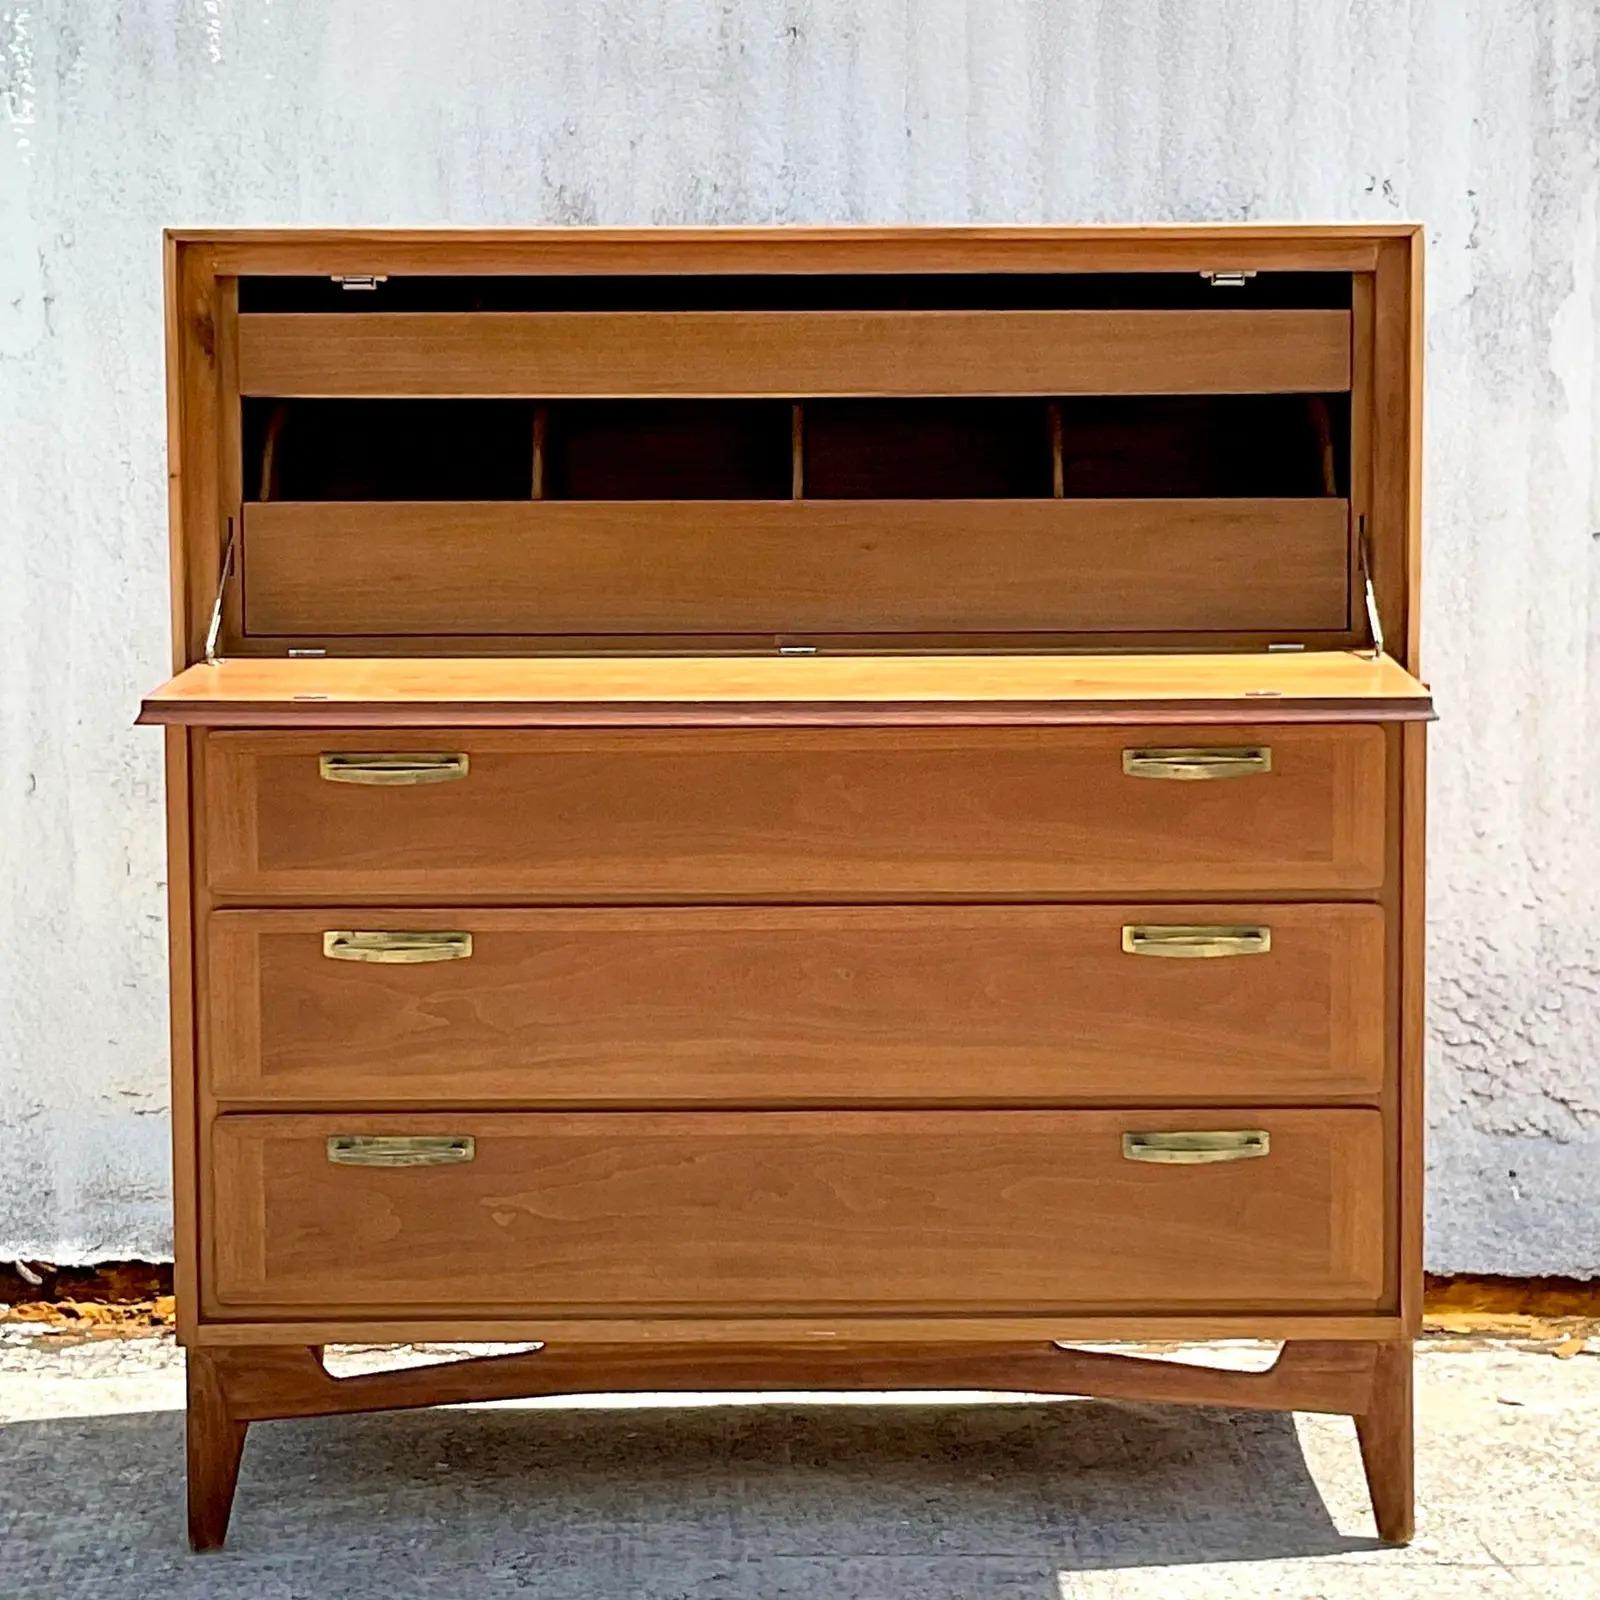 Handsome vintage MCM gentleman’s chest. Beautiful diamond wood pattern. Drop down front reveals a great set of drawers and cabinets. Acquired from a Palm Beach estate.